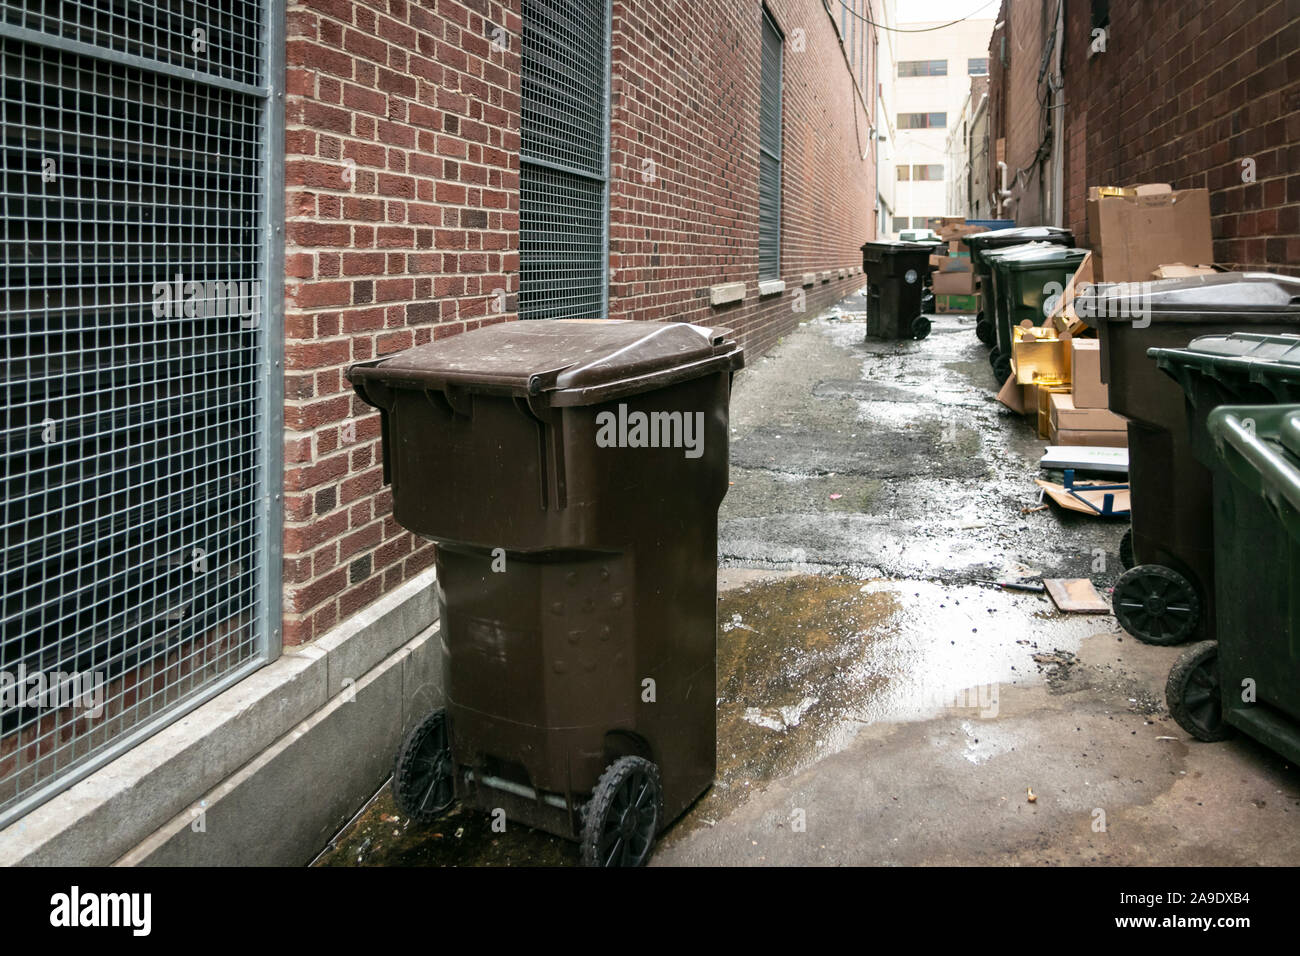 Huge Garbage Can In The Street Of The City Stock Photo, Picture and Royalty  Free Image. Image 115439972.